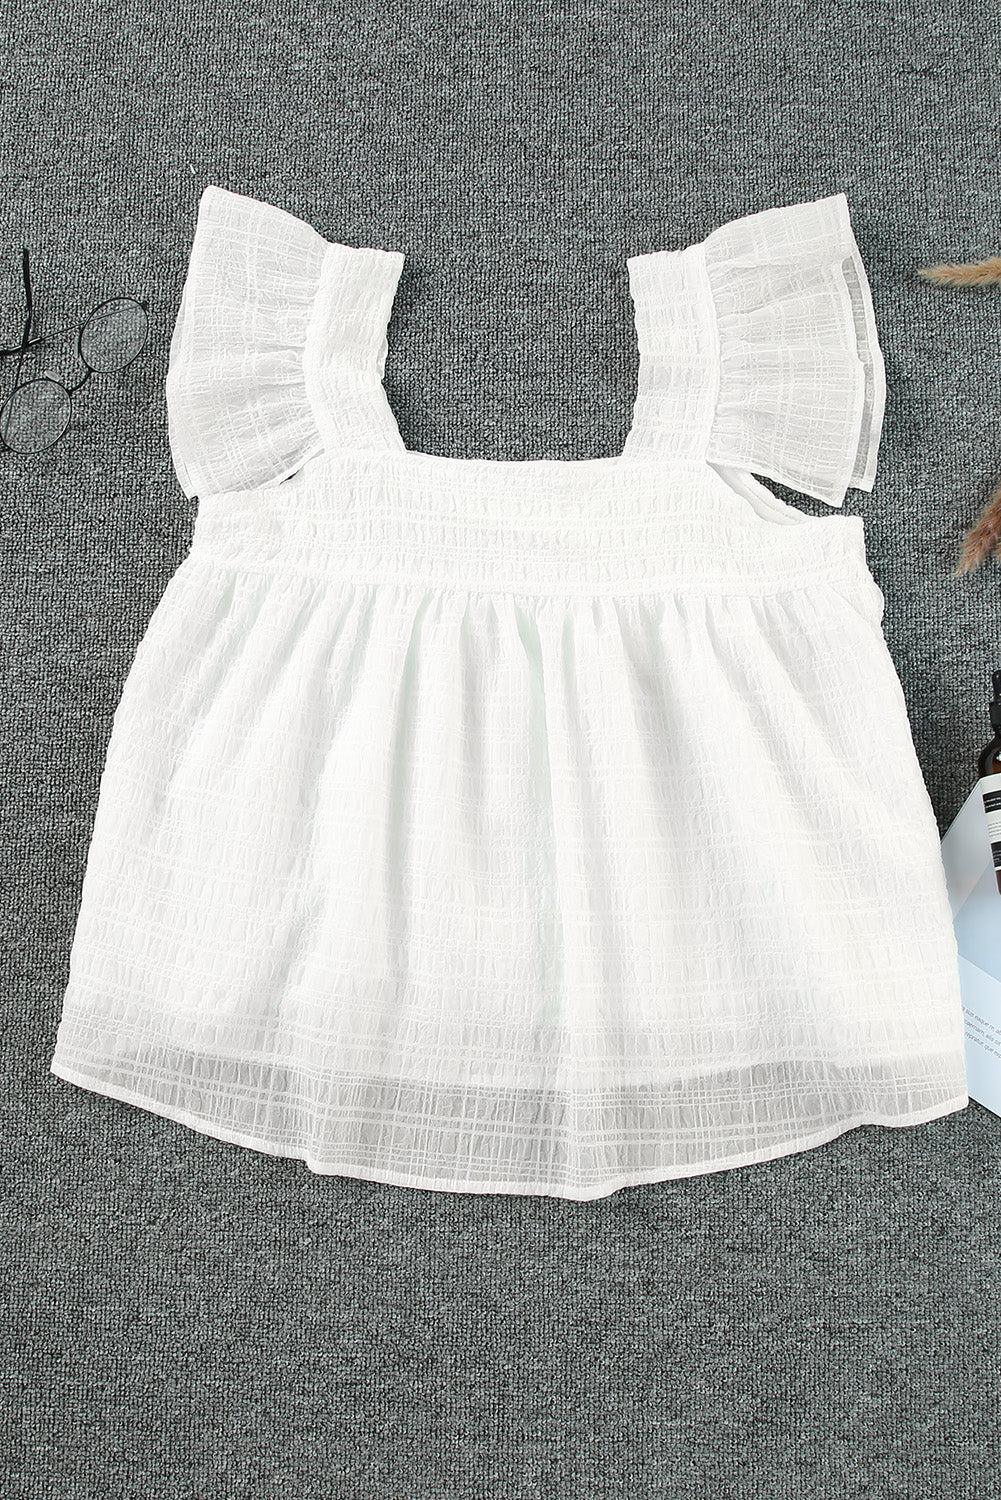 a baby girl's white dress next to a pair of scissors